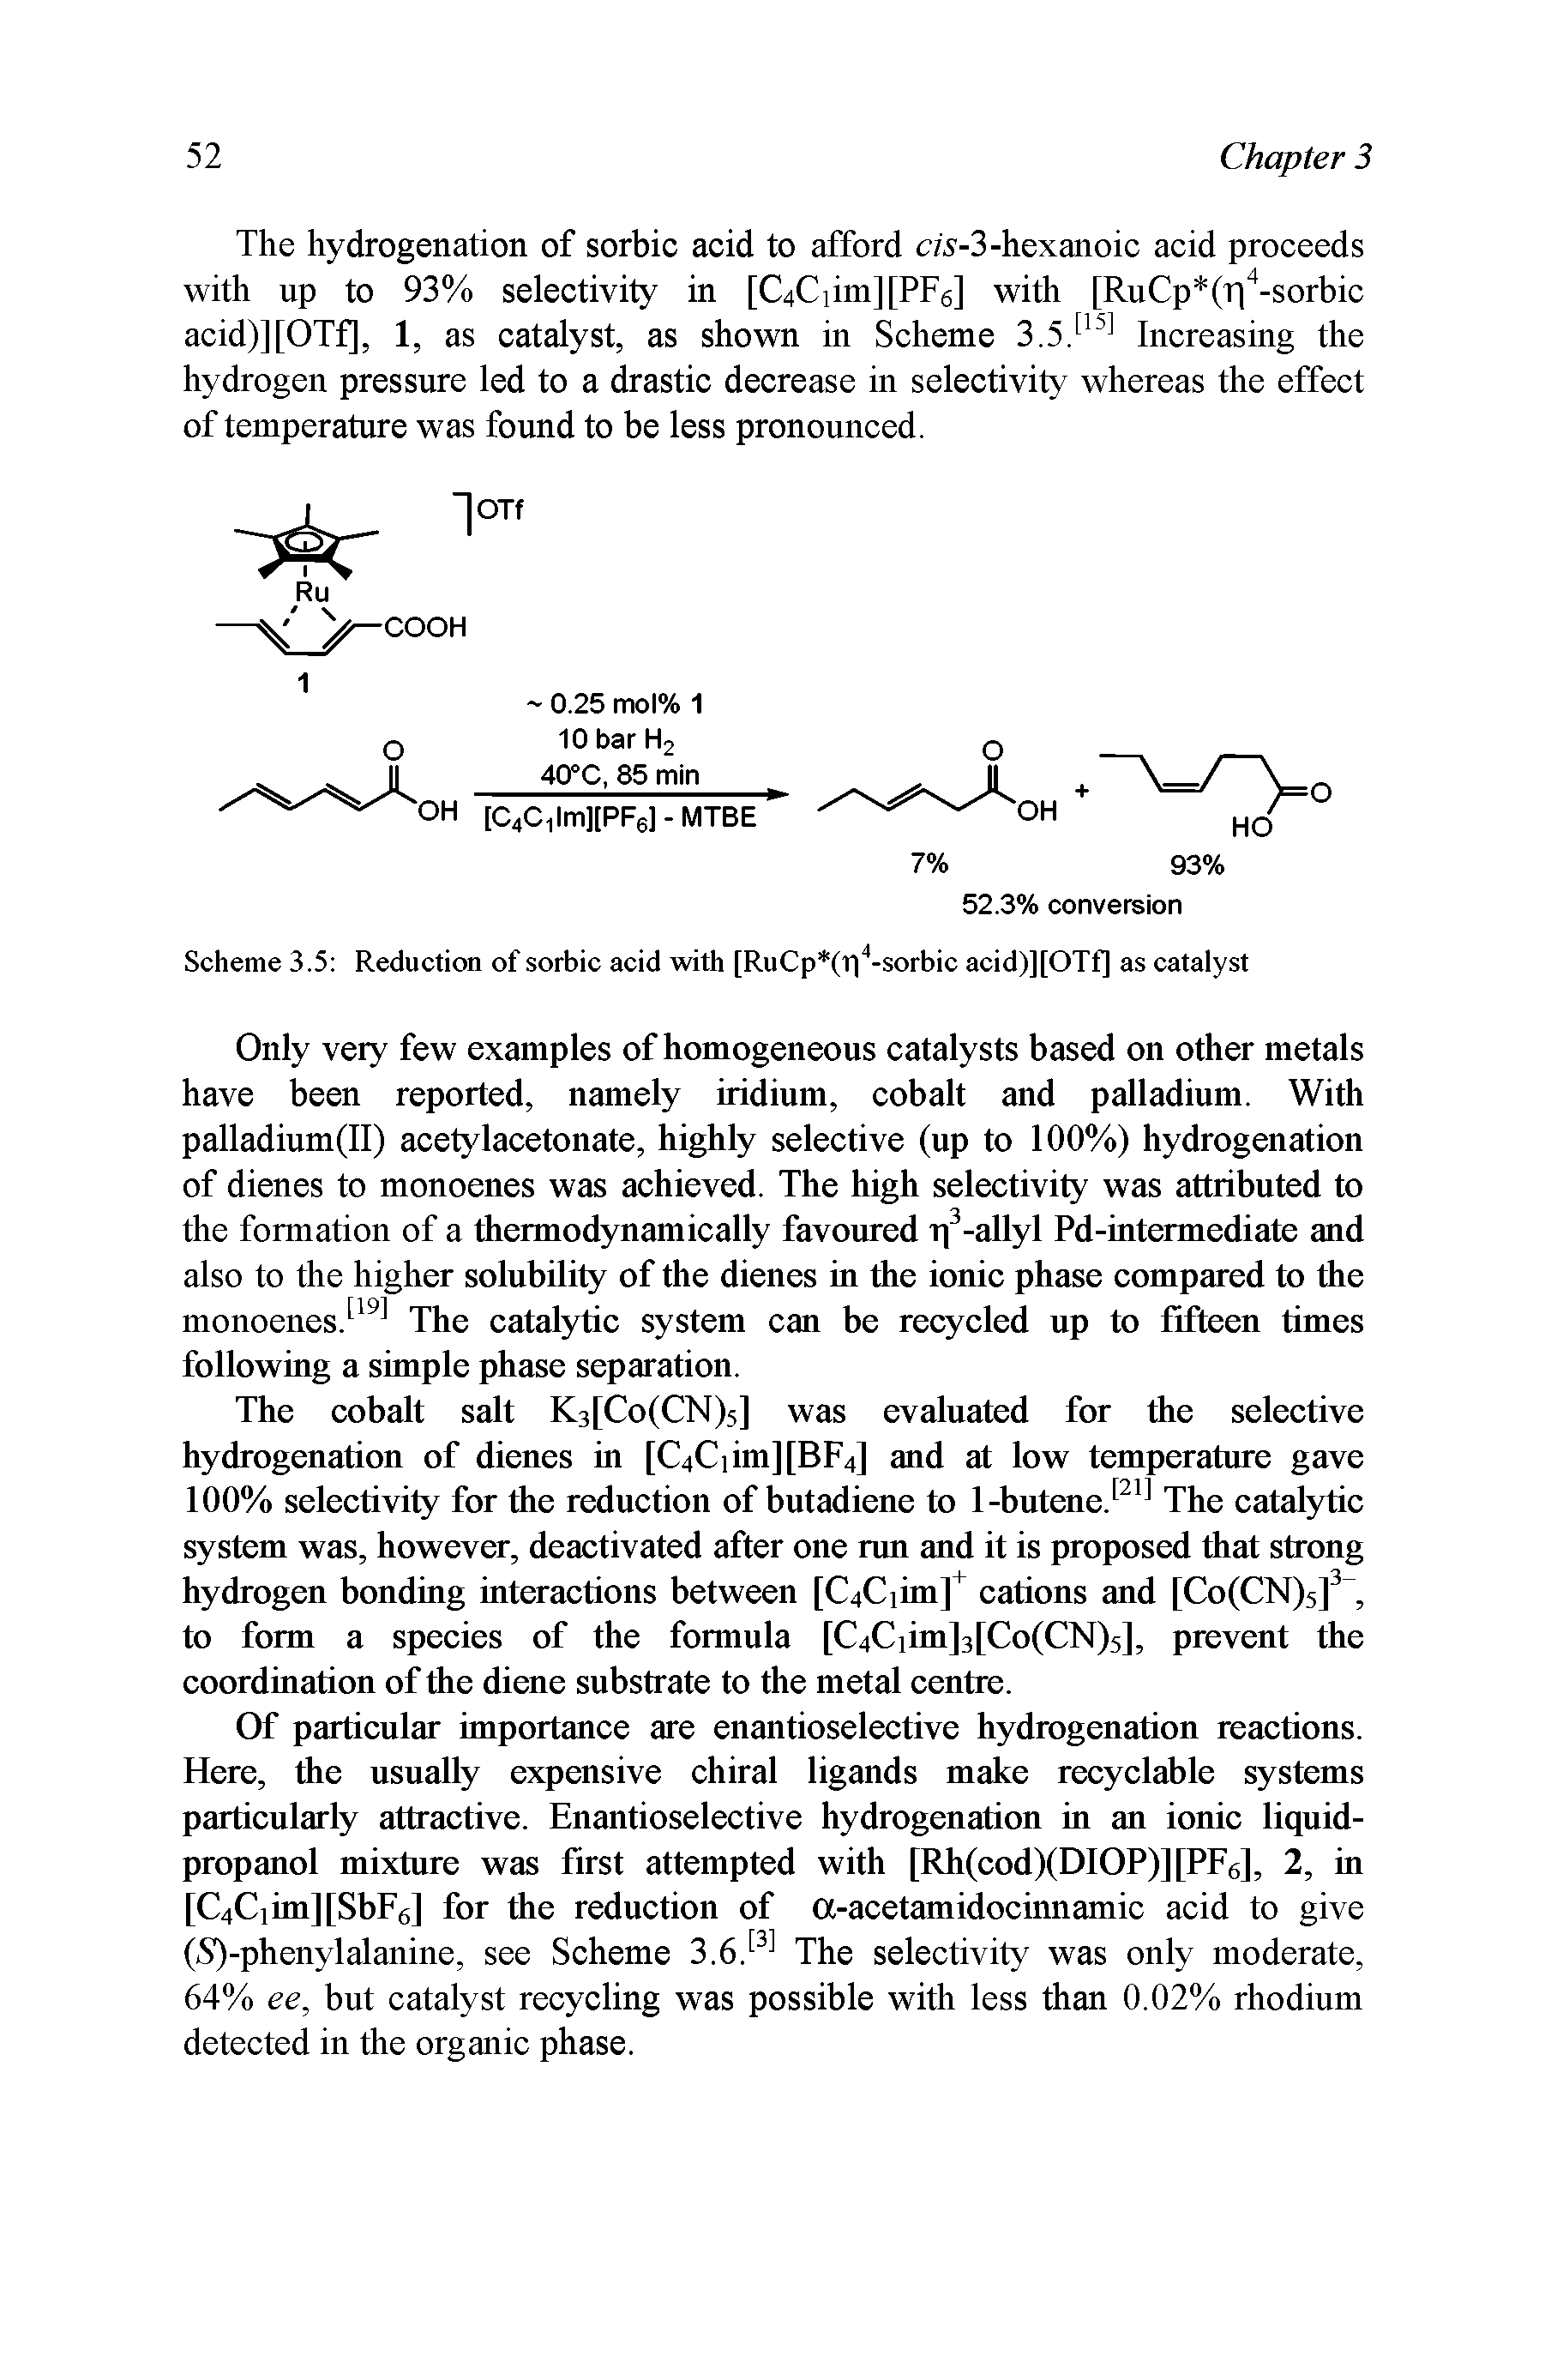 Scheme 3.5 Reduction of sorbic acid with [RuCp (T 4-sorbic acid)][OTf] as catalyst...